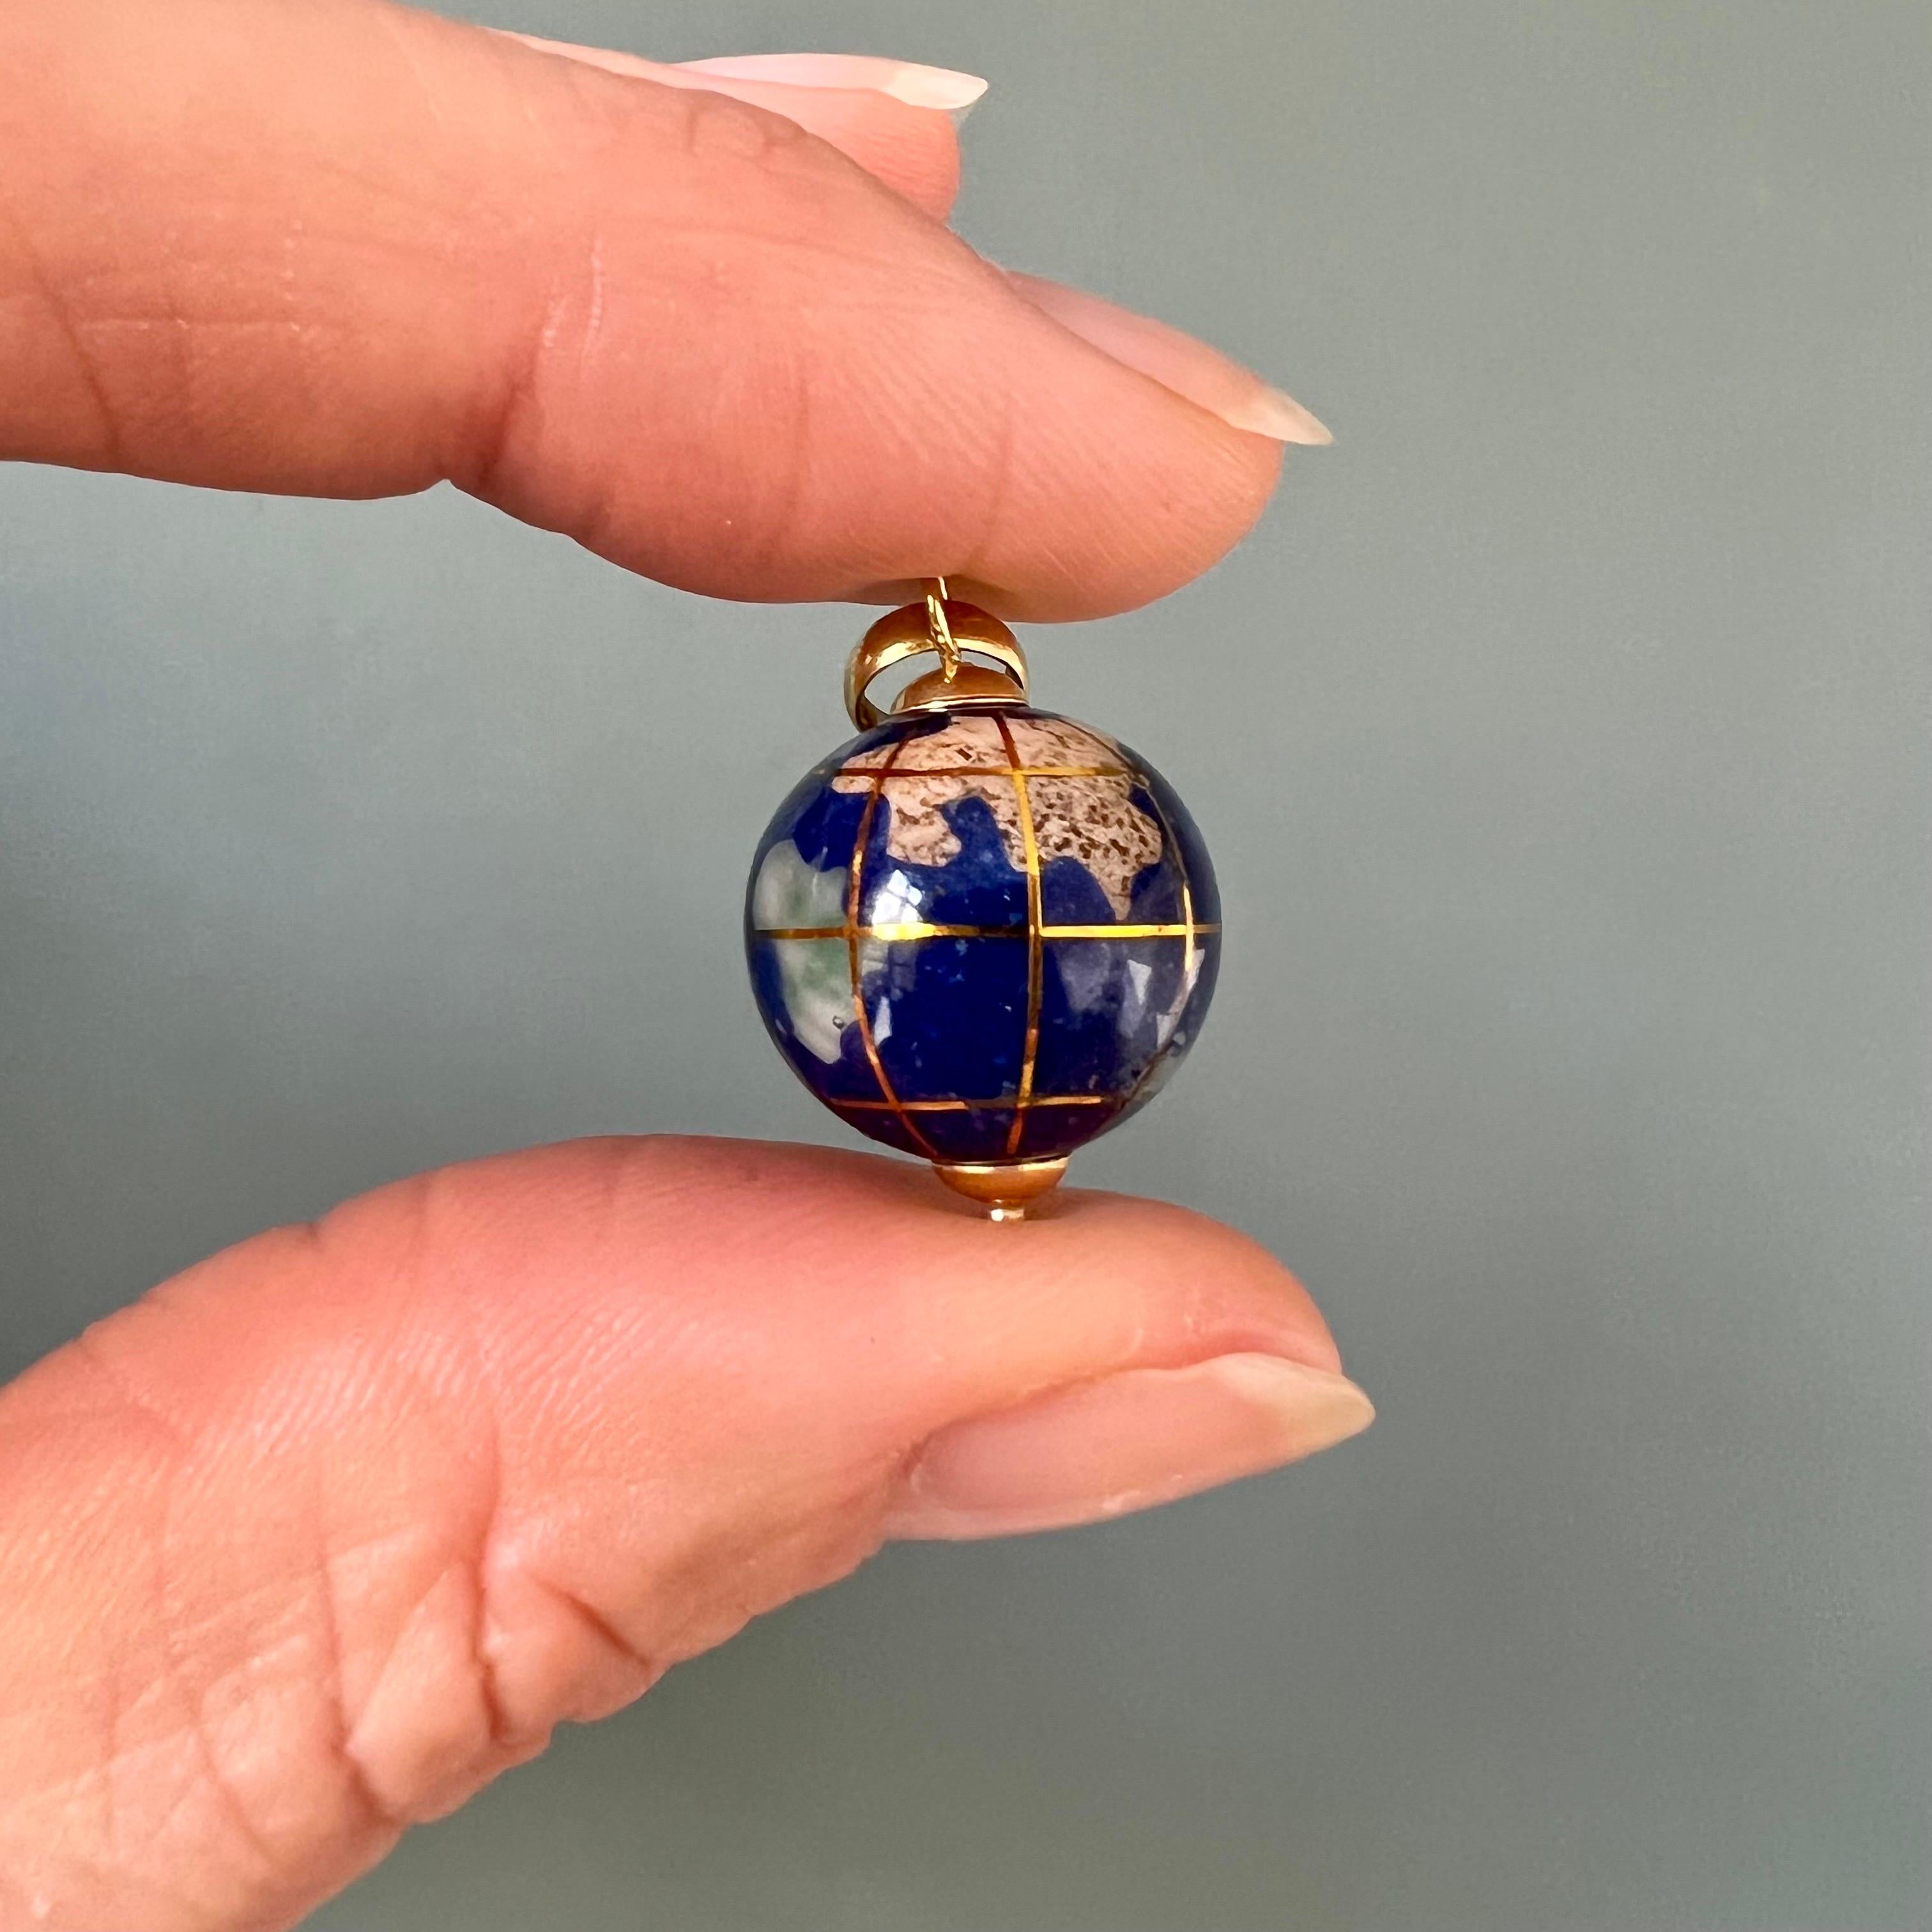 A beautiful 18 karat gold pendant in the shape of a globe, made of porcelain containing several continents and islands. These are inlaid with mother-of-pearl and semi-precious stones, including Peridot, Aventurine and Jasper. The porcelain is